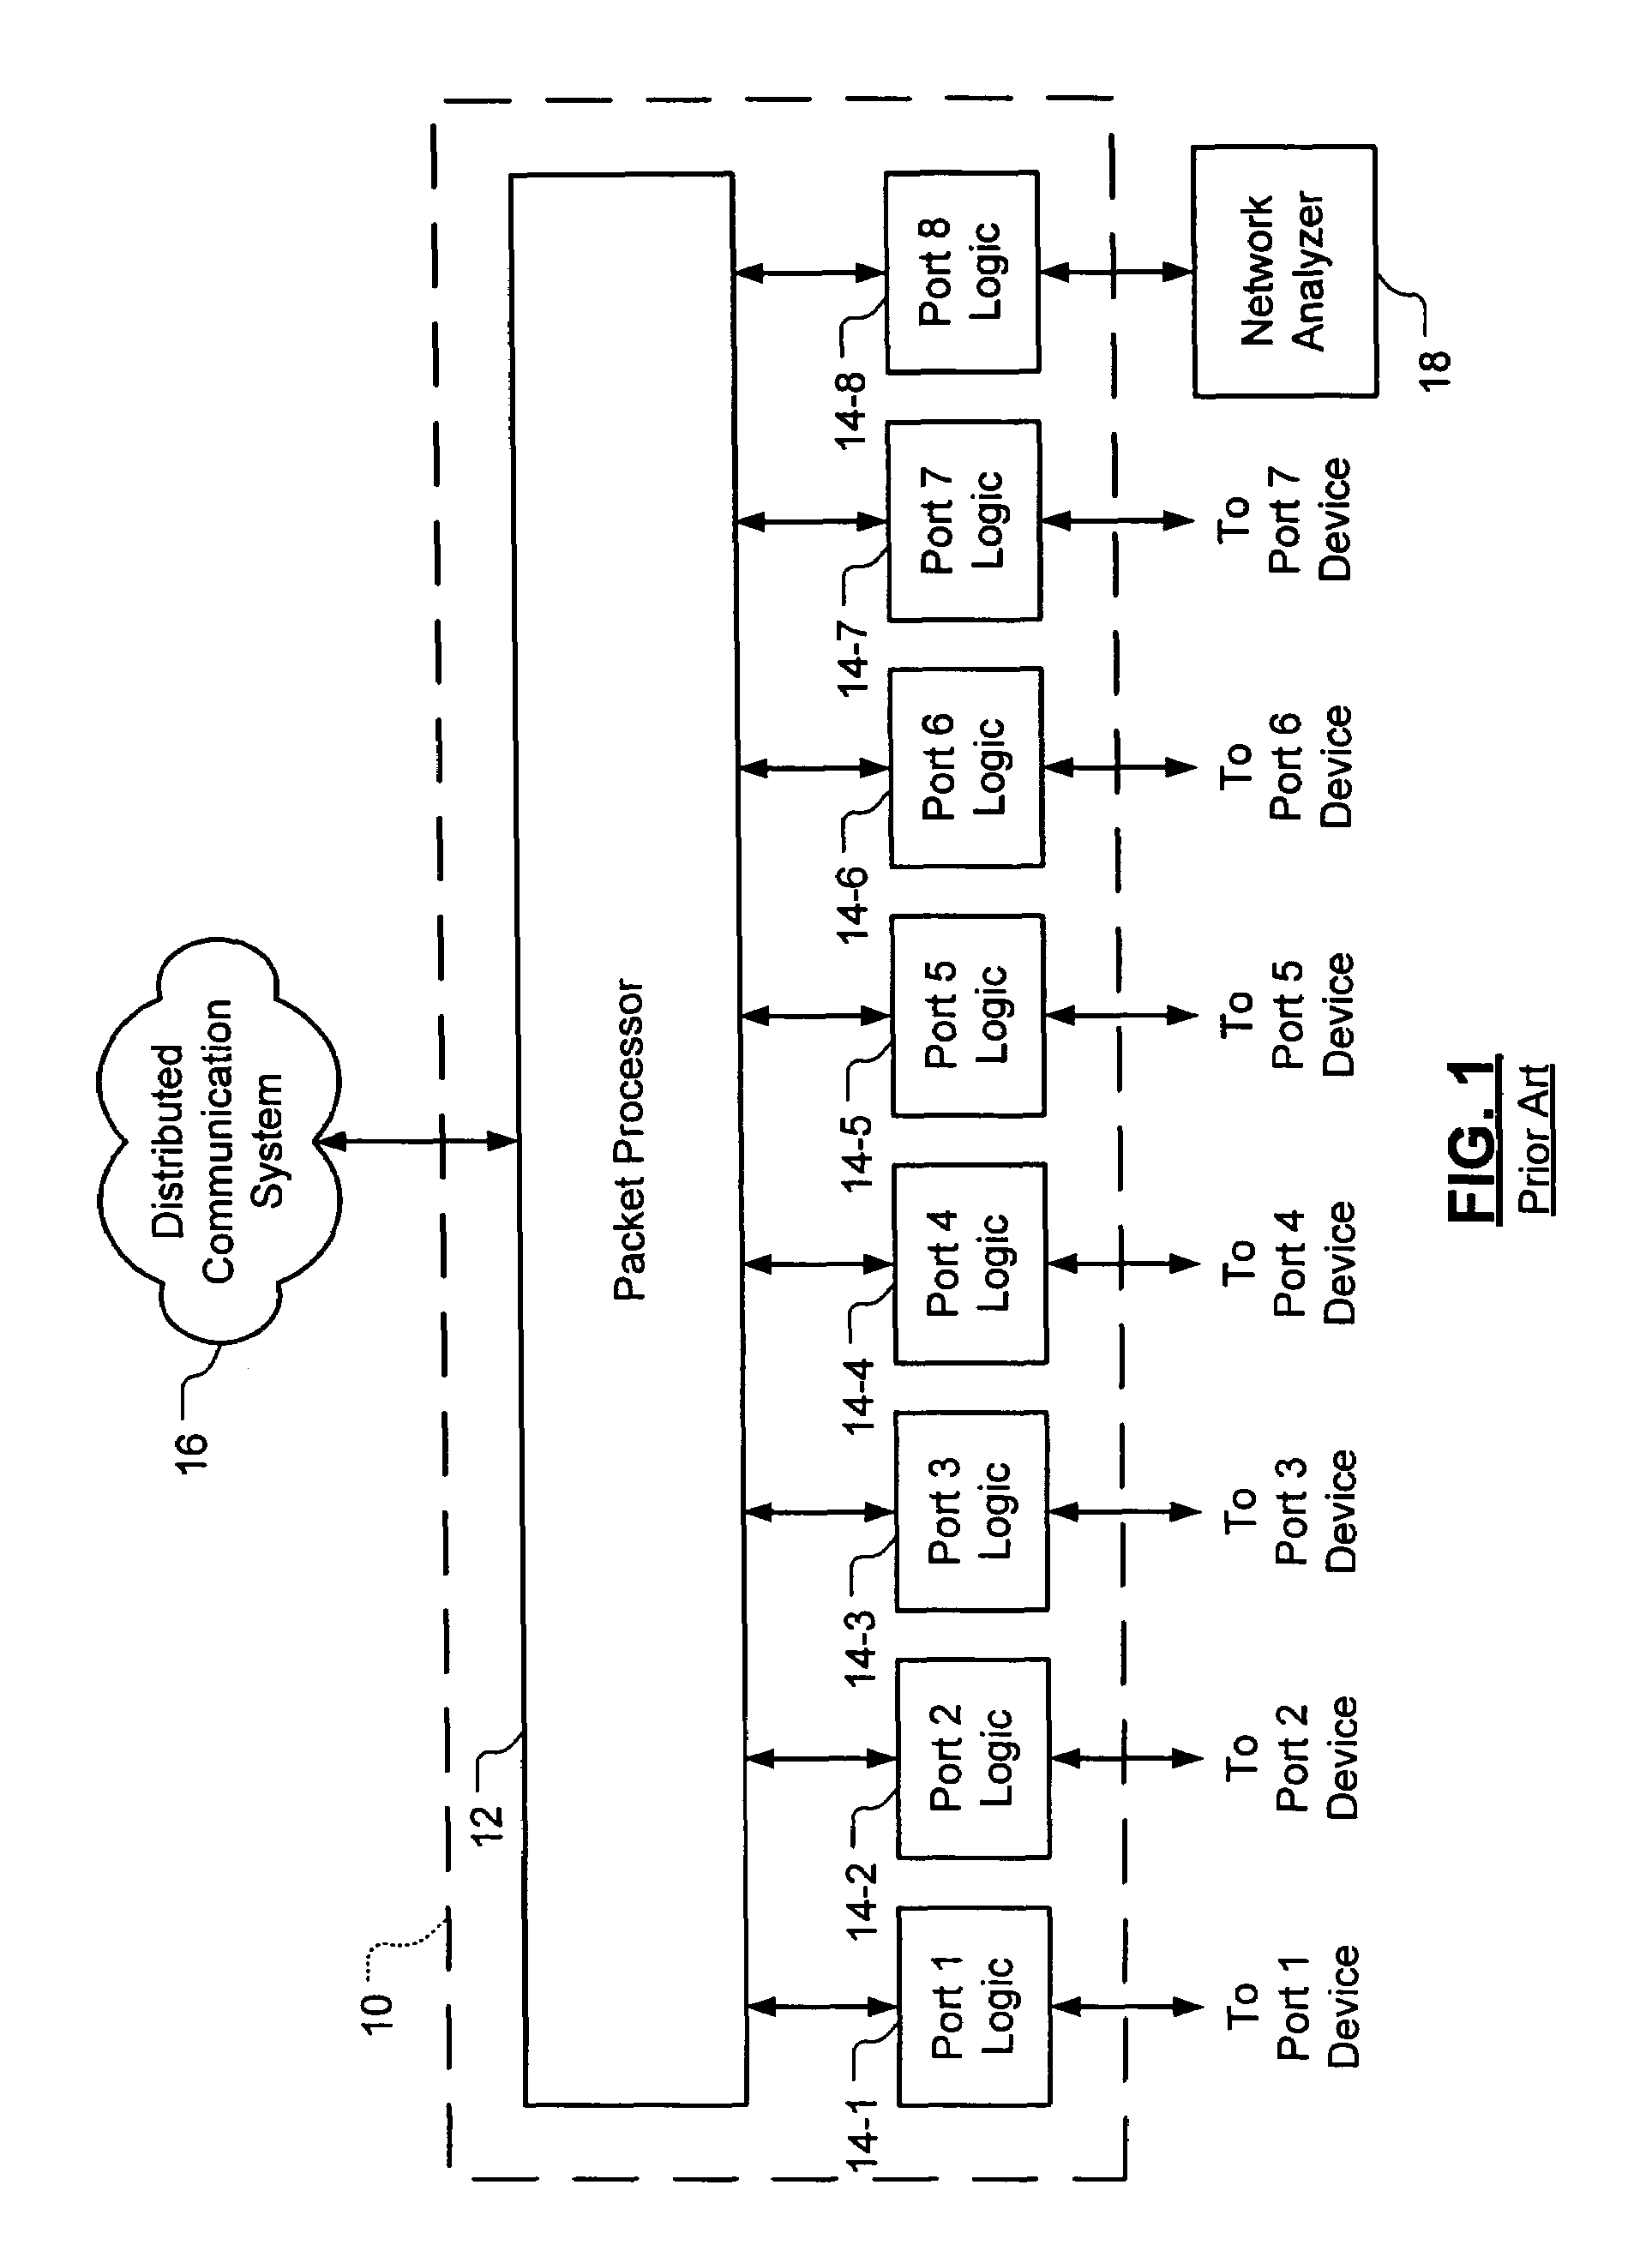 Local area network switch using control plane packet mirroring to support multiple network traffic analysis devices